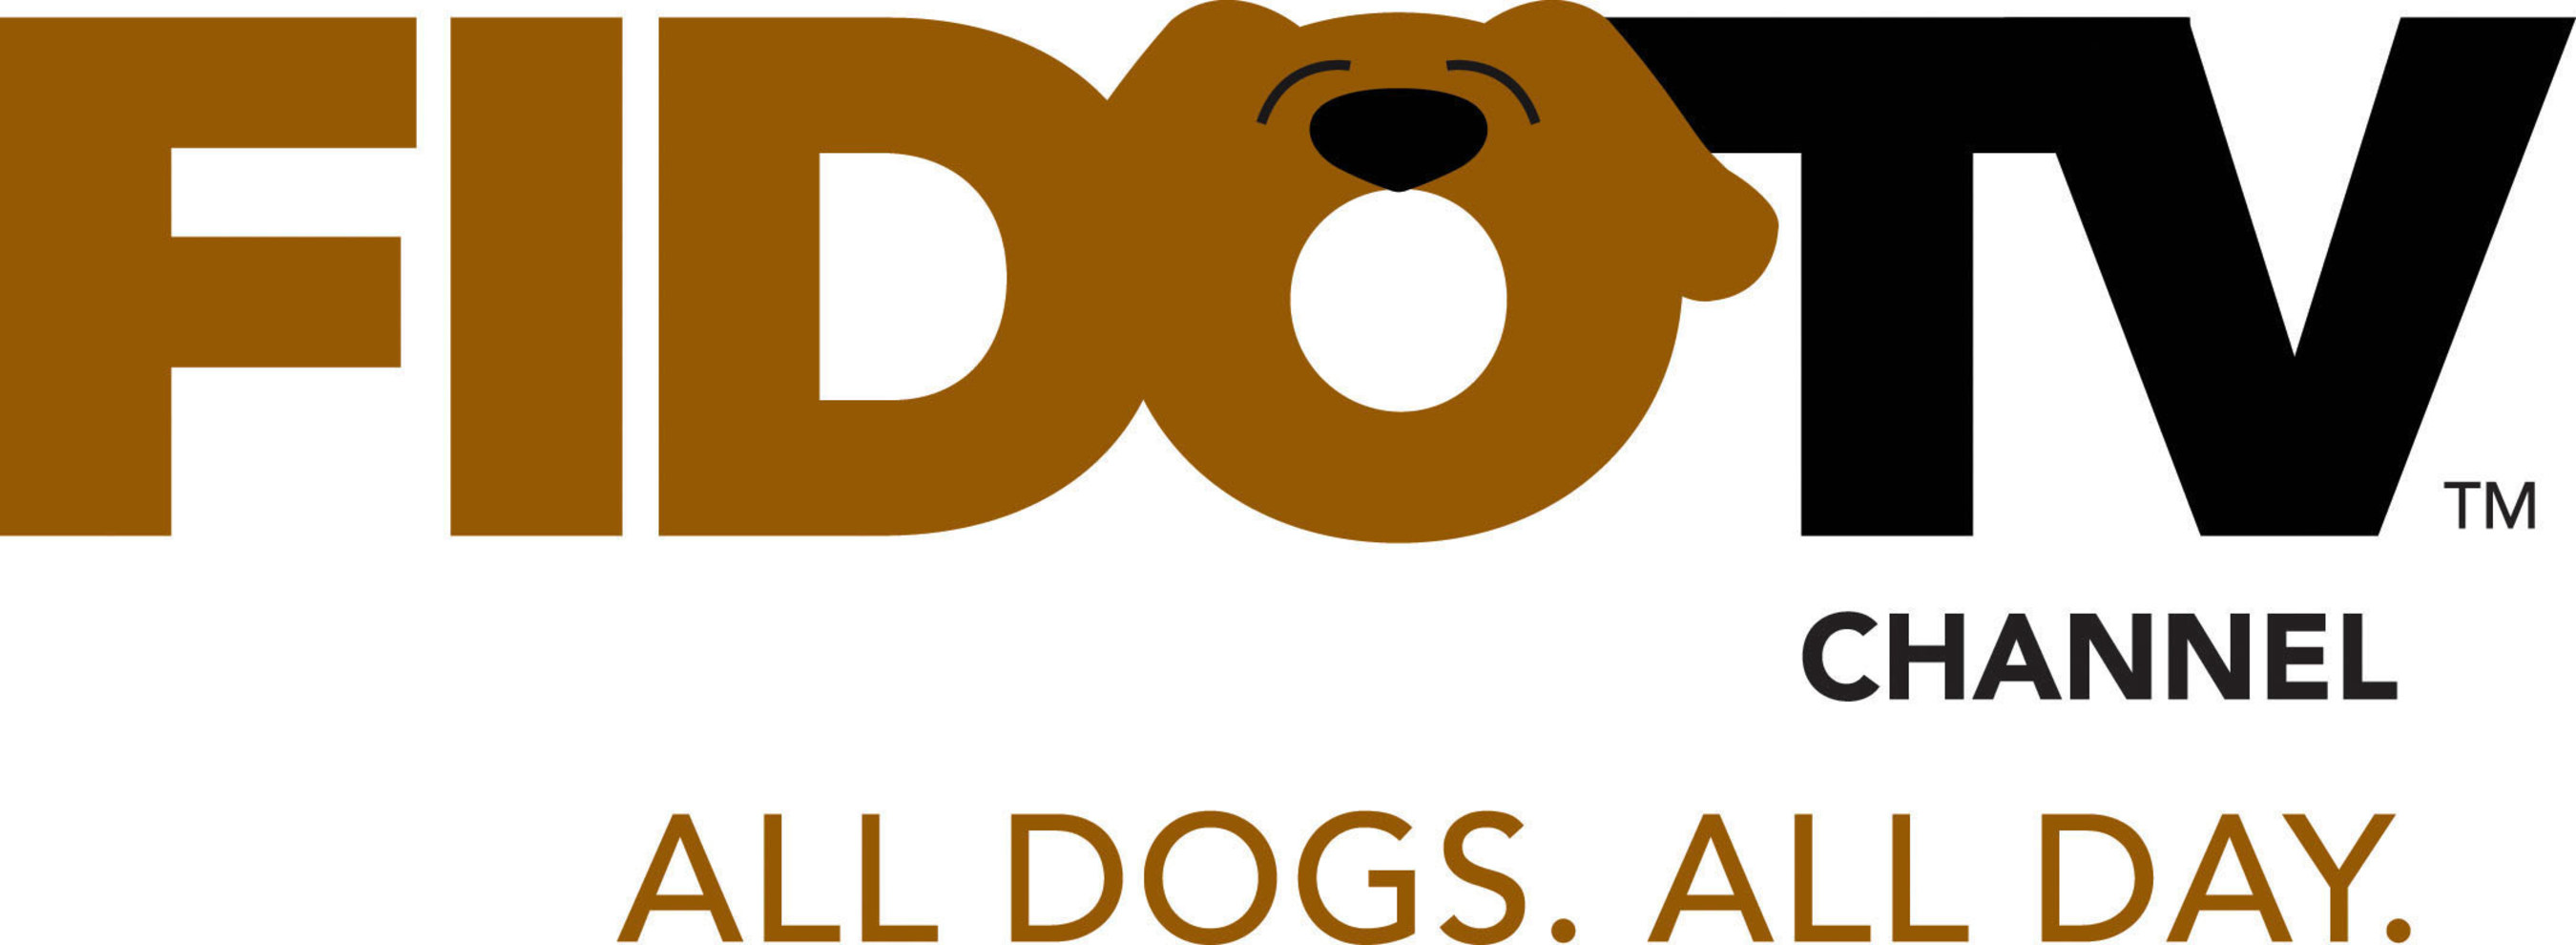 FidoTV, the first television programming channel dedicated solely to dog lovers, launches "All Dogs. All Day." entertainment on DISH.